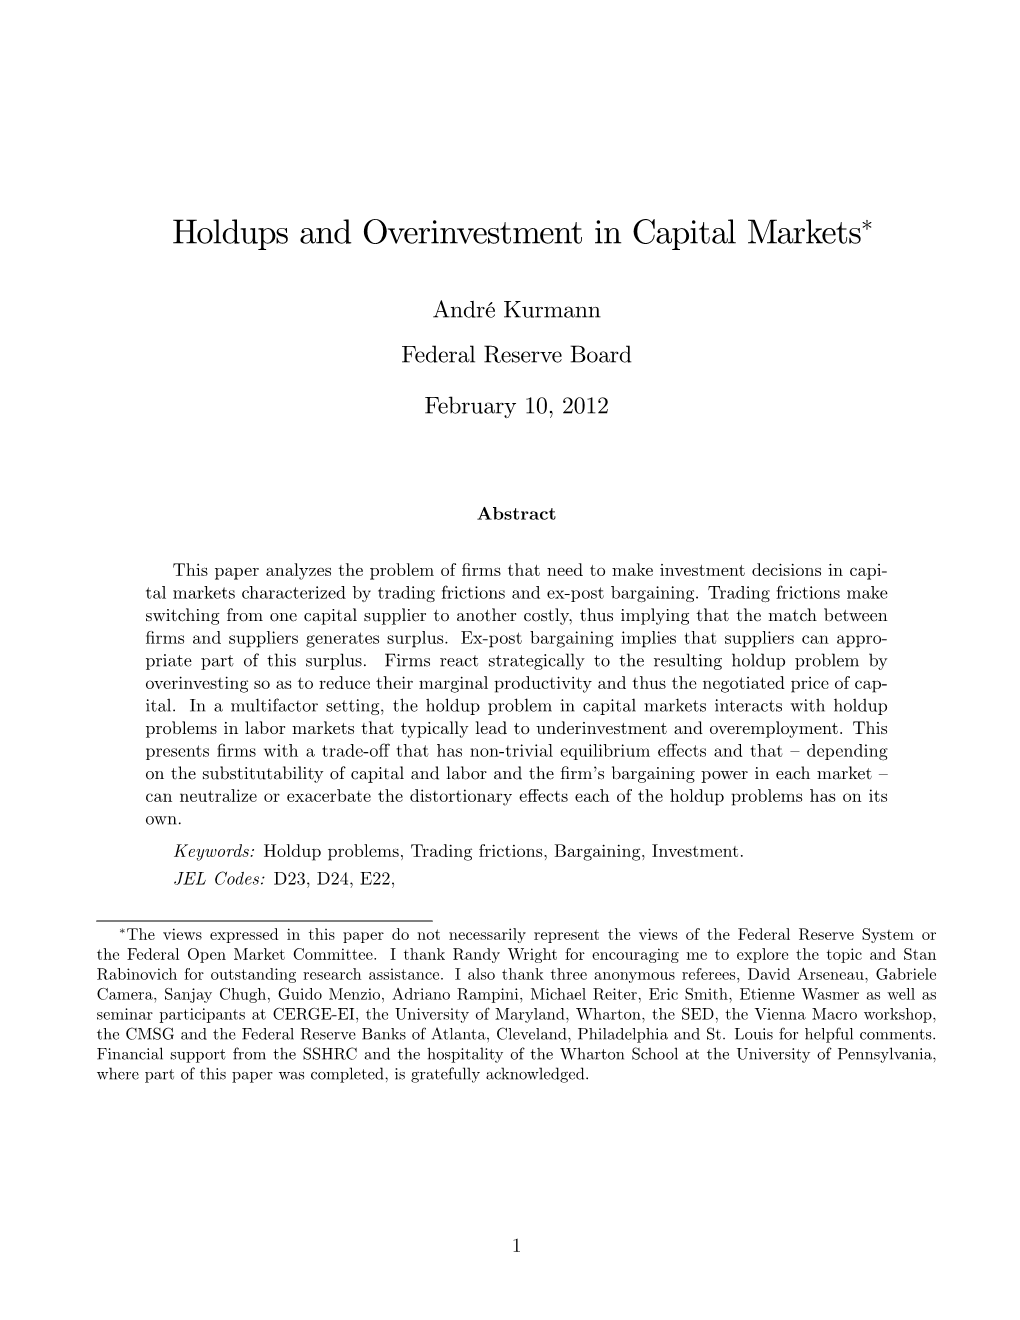 Holdups and Overinvestment in Capital Markets"